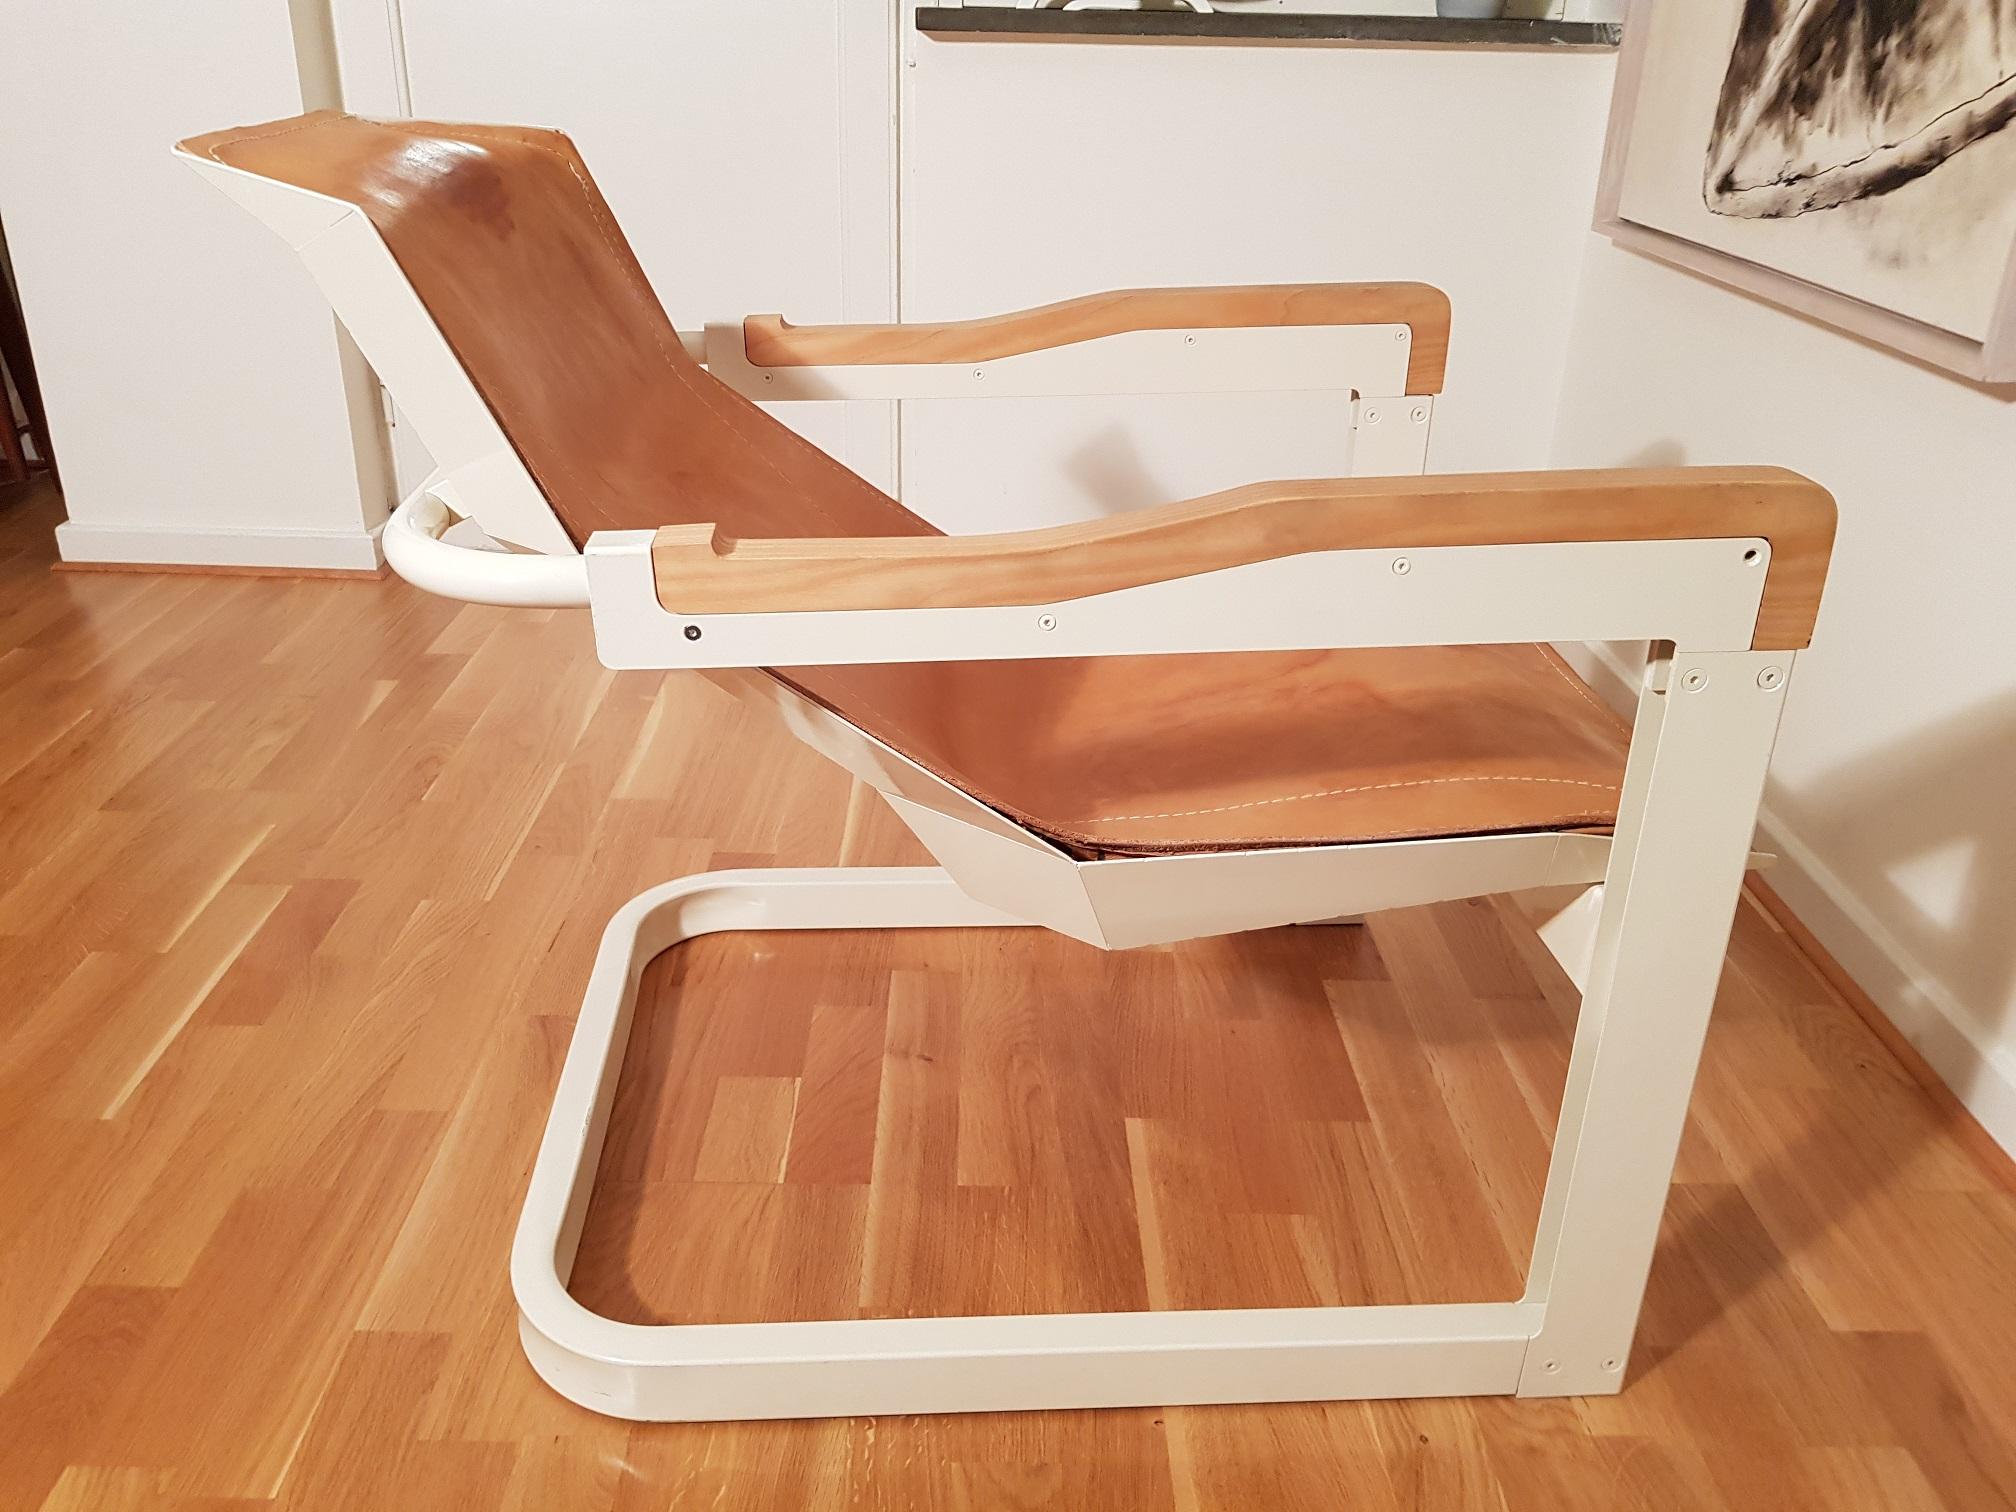 This fantastic piece if furniture is 1 of 3 ever made (to our knowledge). The design and name Atlantic Hellride came to be after a flight that Mats Theselius had in 2005. A limited edition of 360 chairs was initially planned but only 3 pieces were